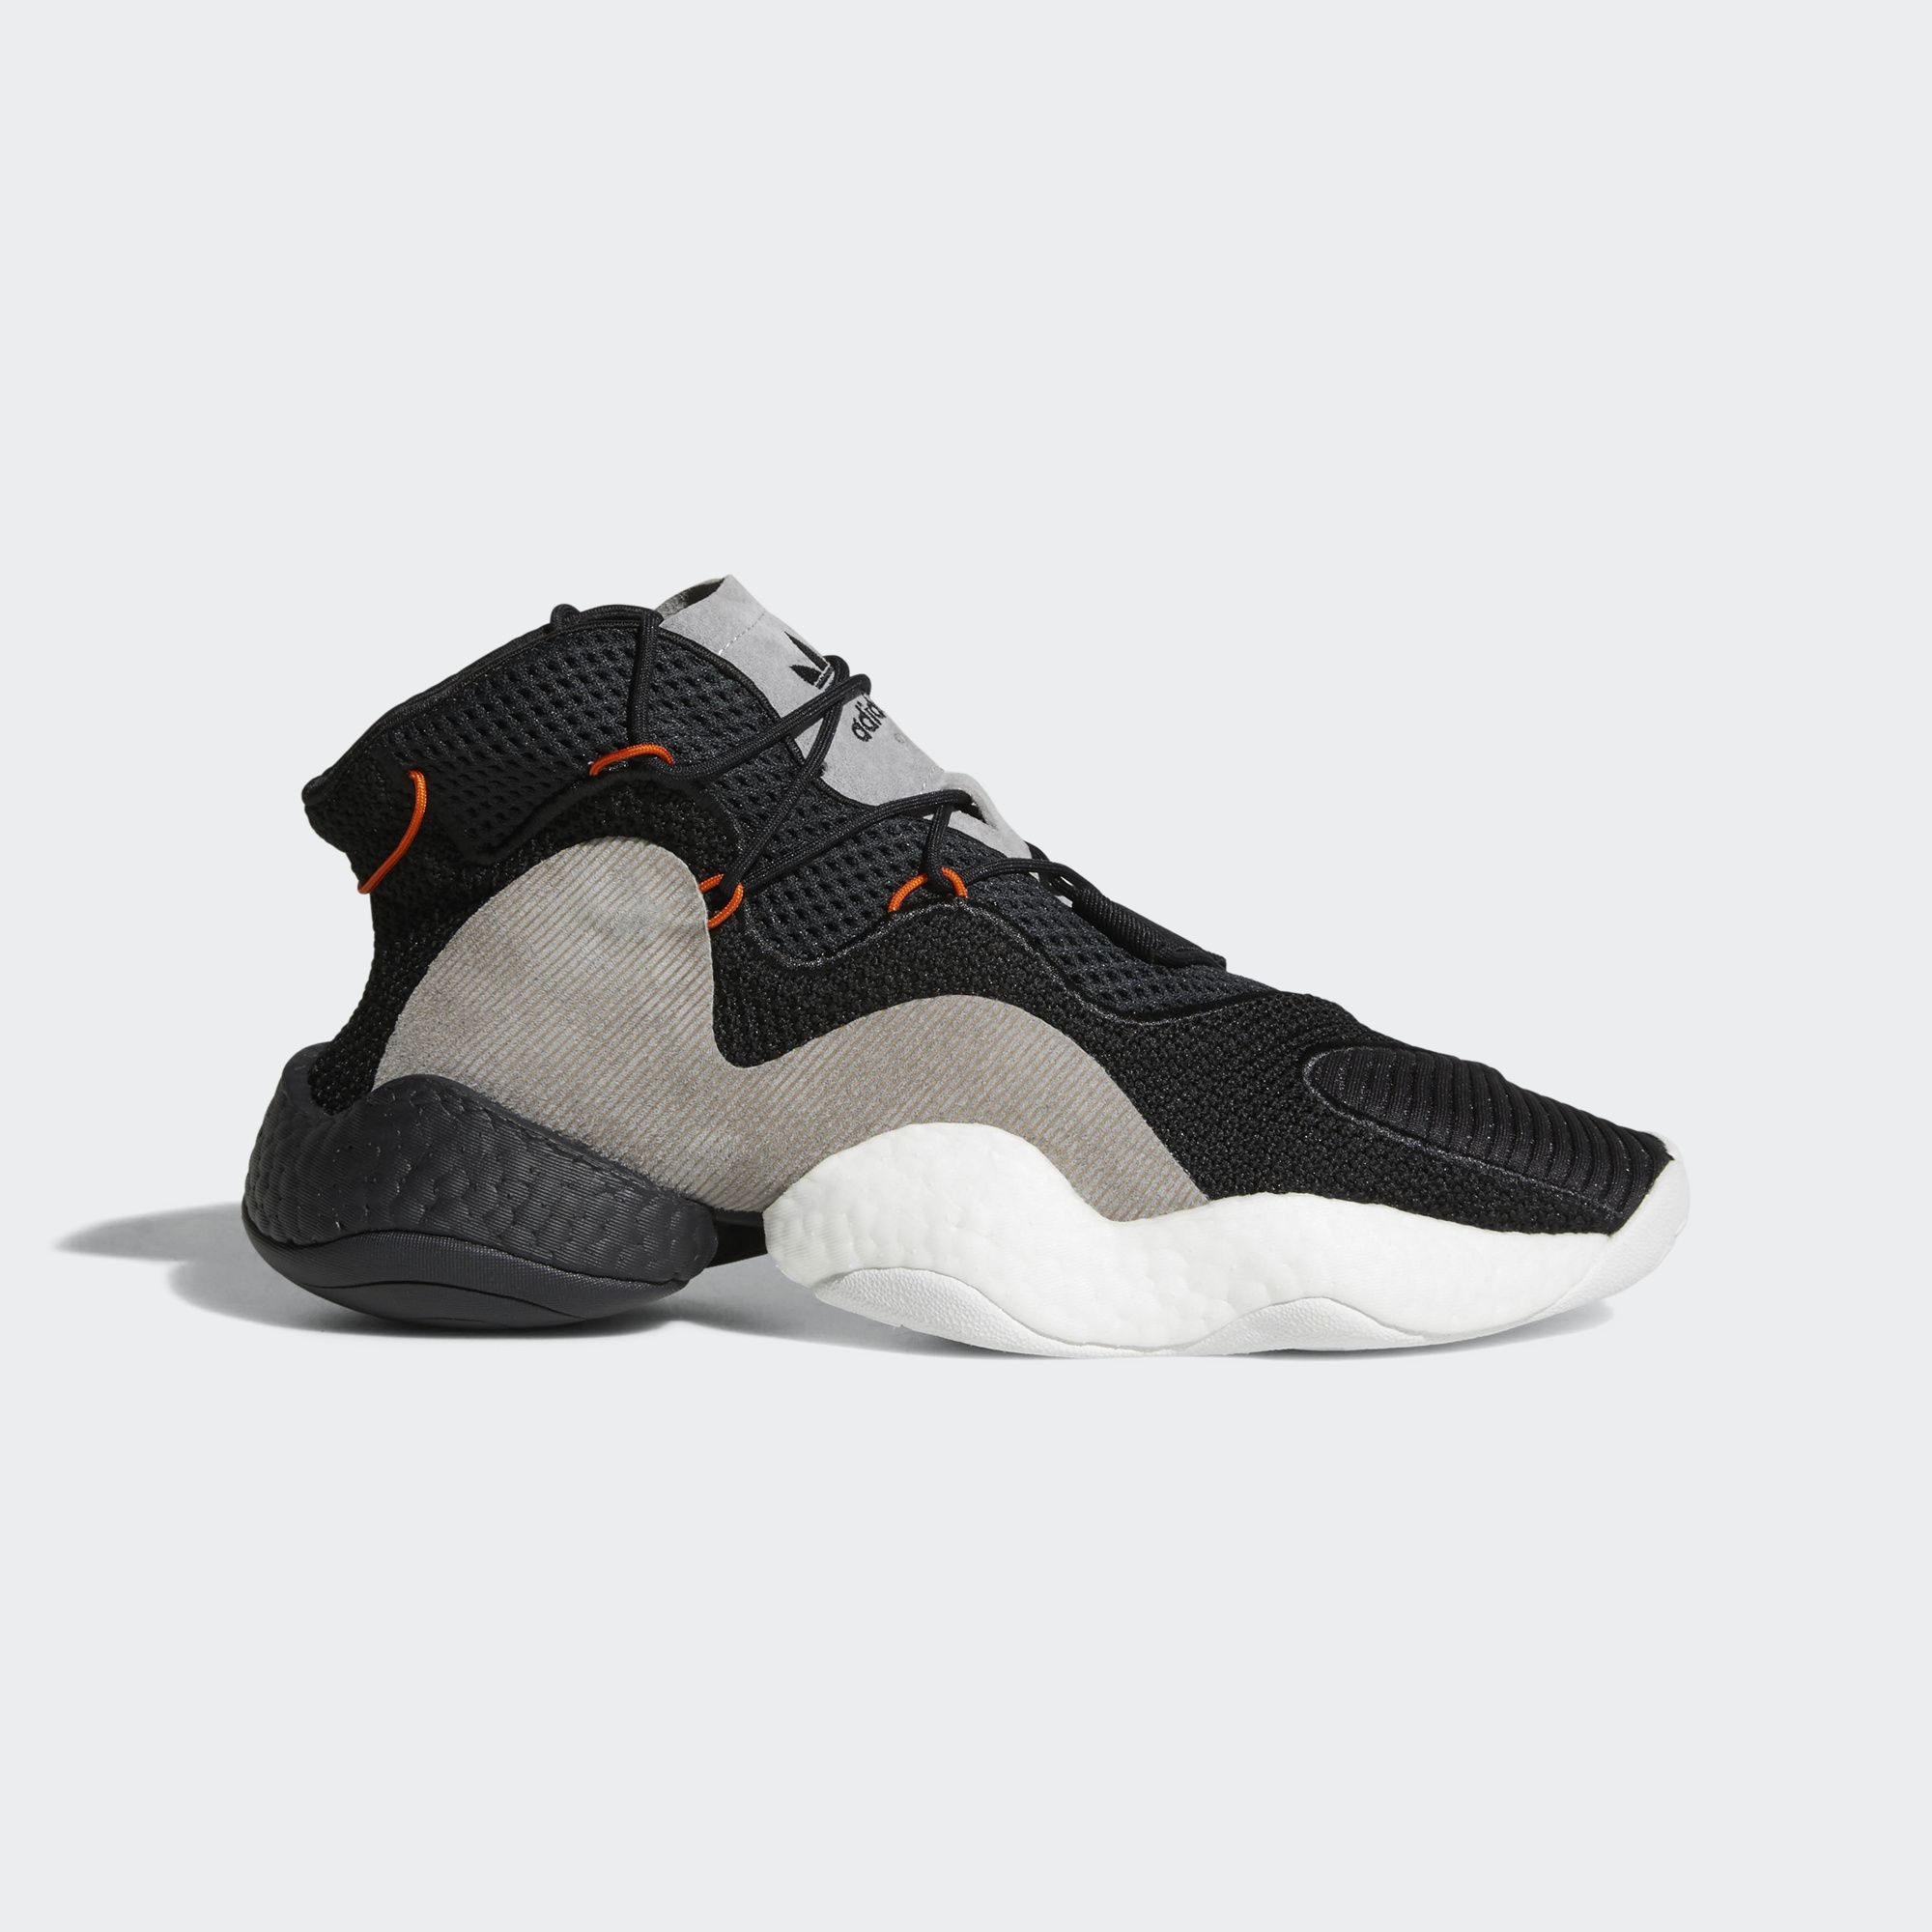 adidas Crazy BYW LVL 1 6 - WearTesters